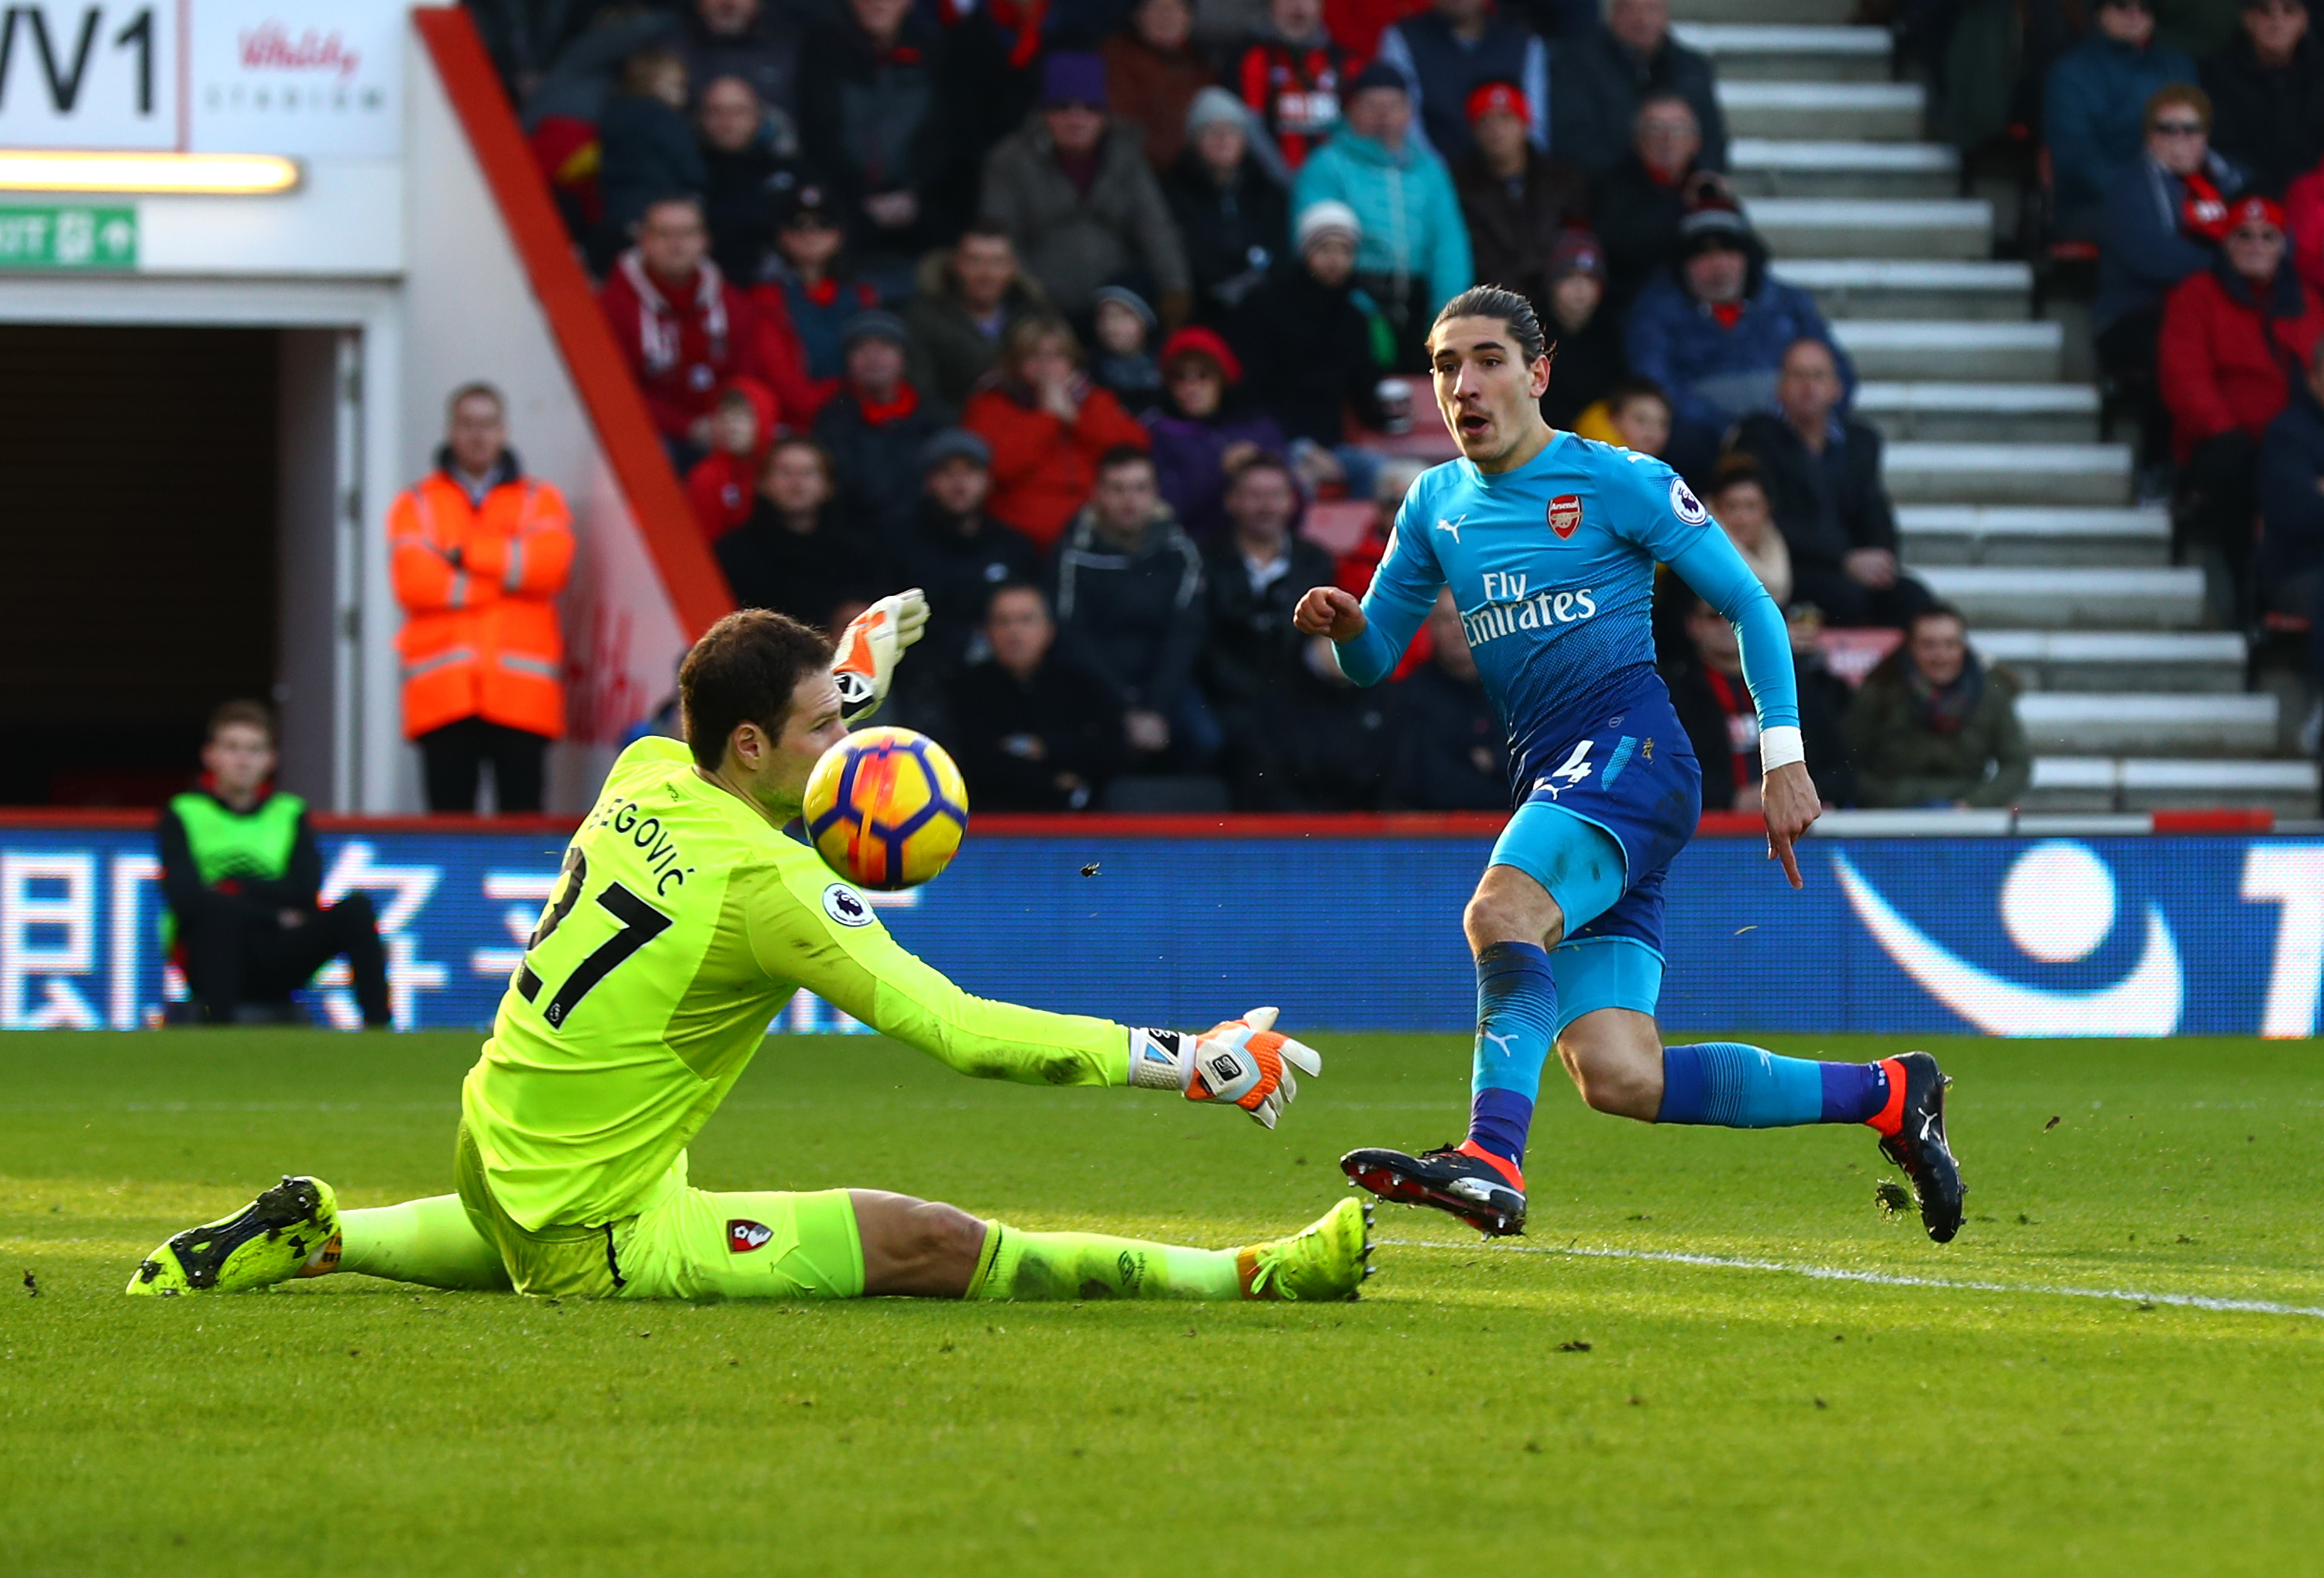 BOURNEMOUTH, ENGLAND - JANUARY 14:  Hector Bellerin of Arsenal scores his sides first goal past Asmir Begovic of AFC Bournemouth during the Premier League match between AFC Bournemouth and Arsenal at Vitality Stadium on January 14, 2018 in Bournemouth, England.  (Photo by Clive Rose/Getty Images)